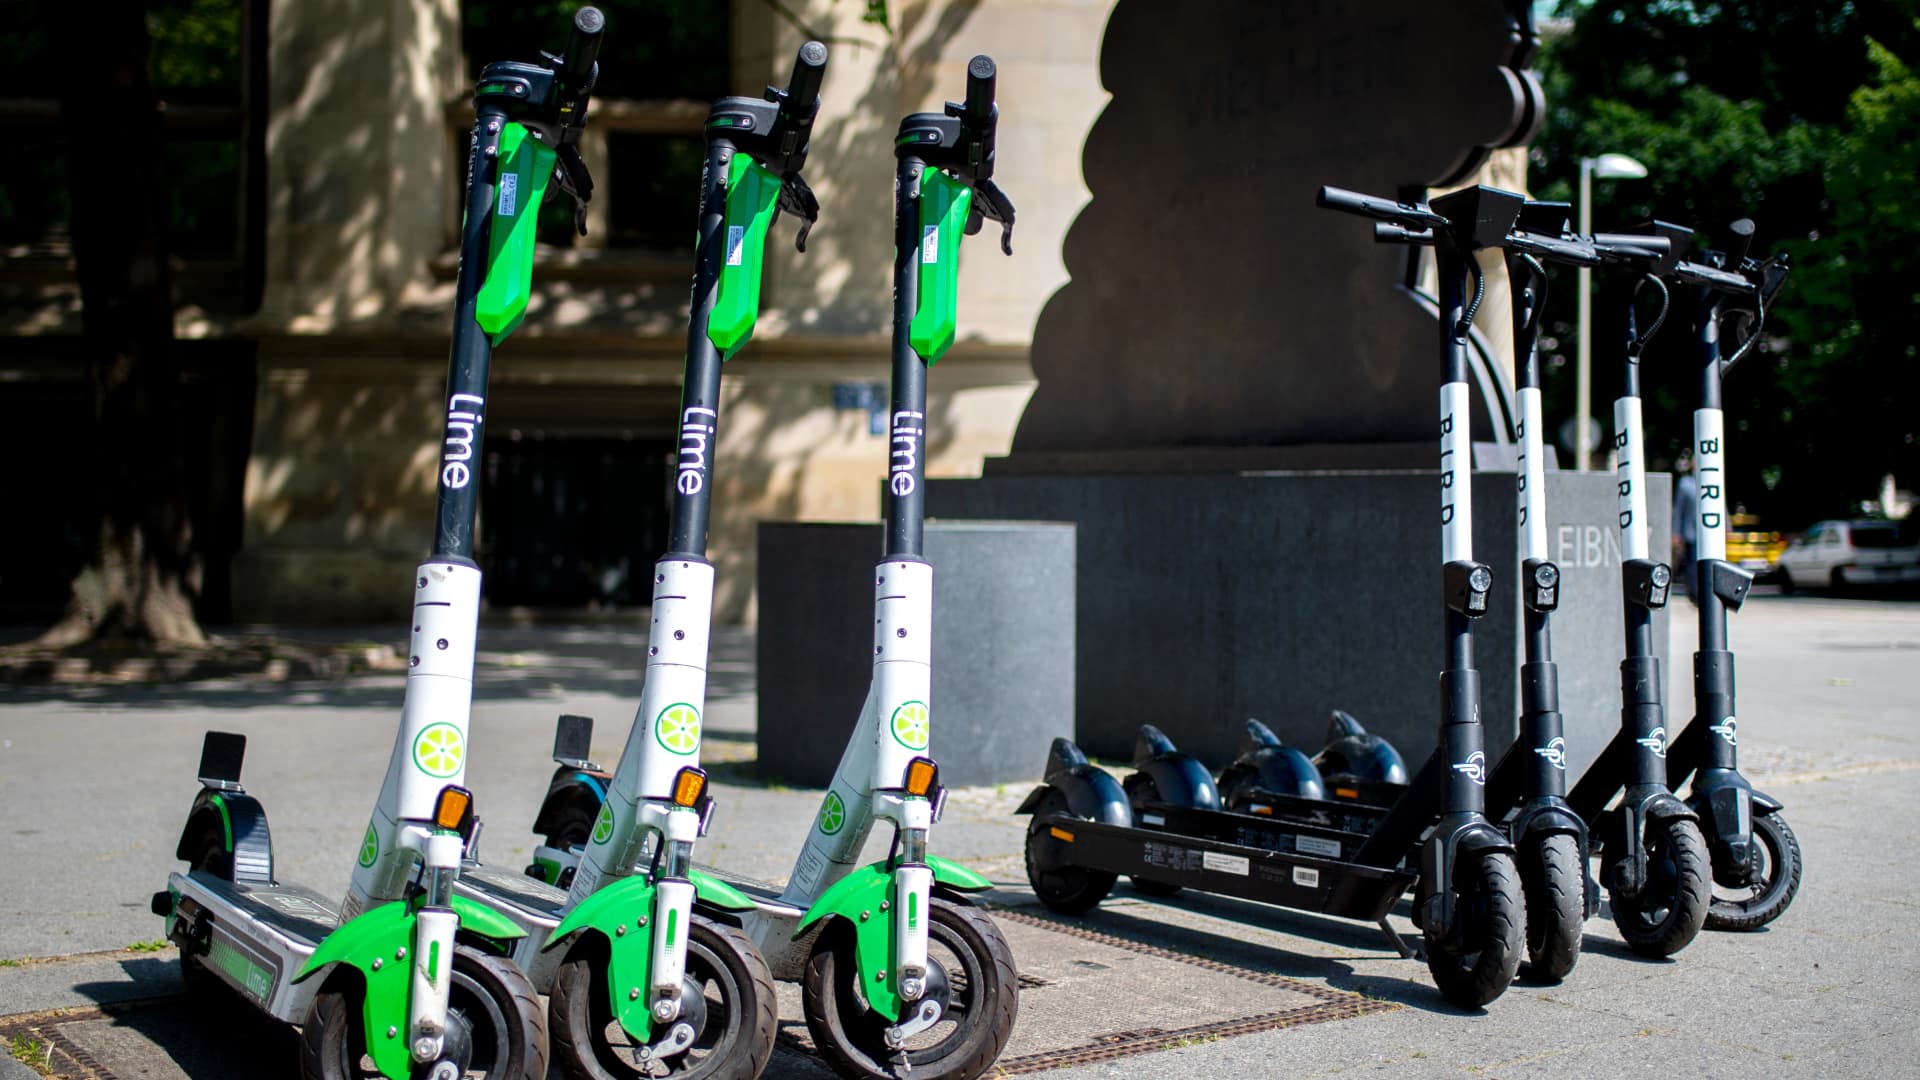 E-scooters from the electric scooter-sharing providers Lime and Bird in Hannover, Germany.